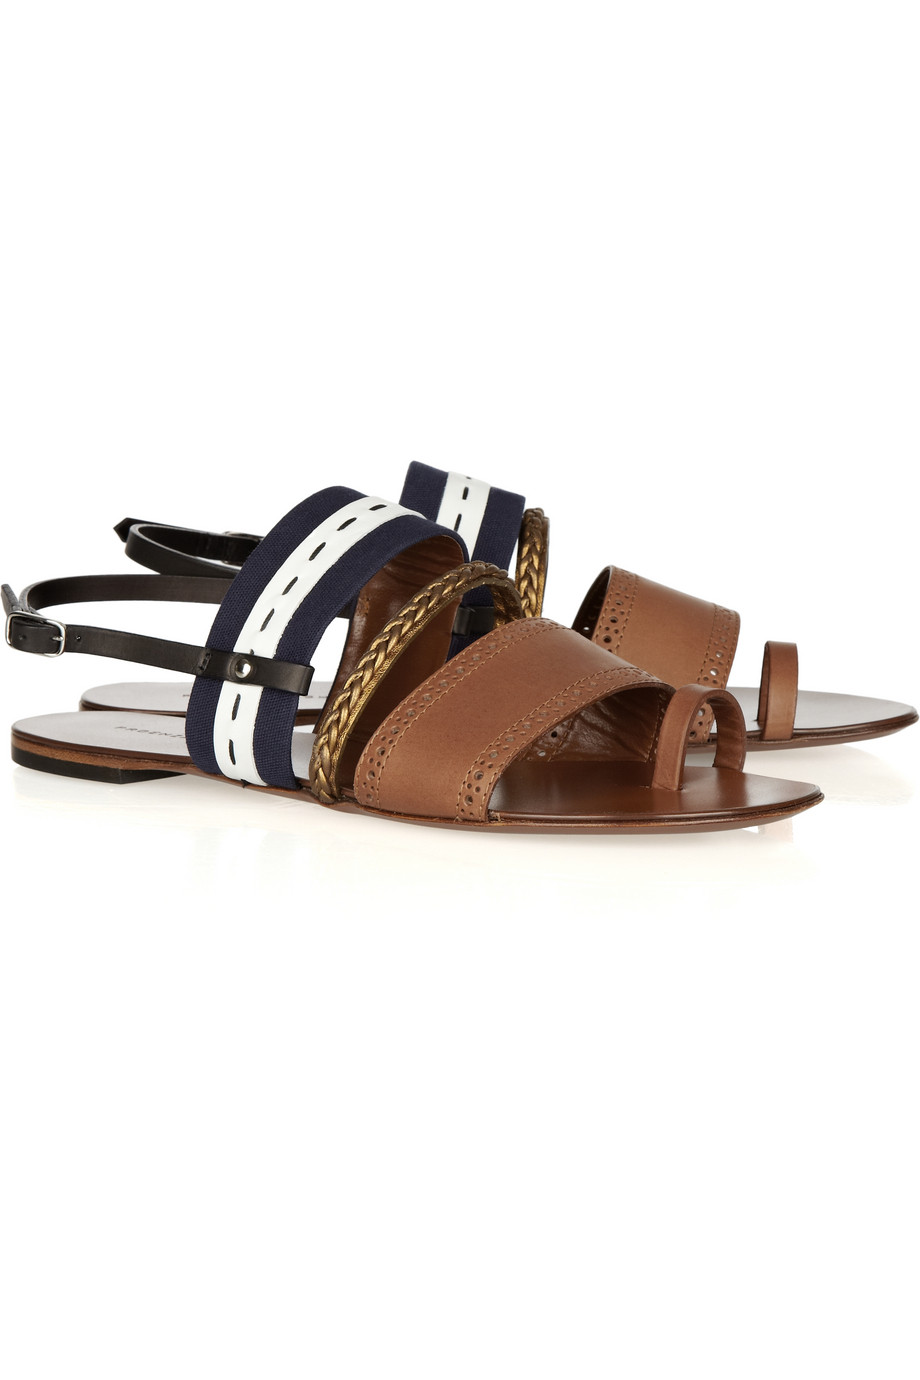 15 of the Best Flat Sandals for Summer 2012 - The Front Row View